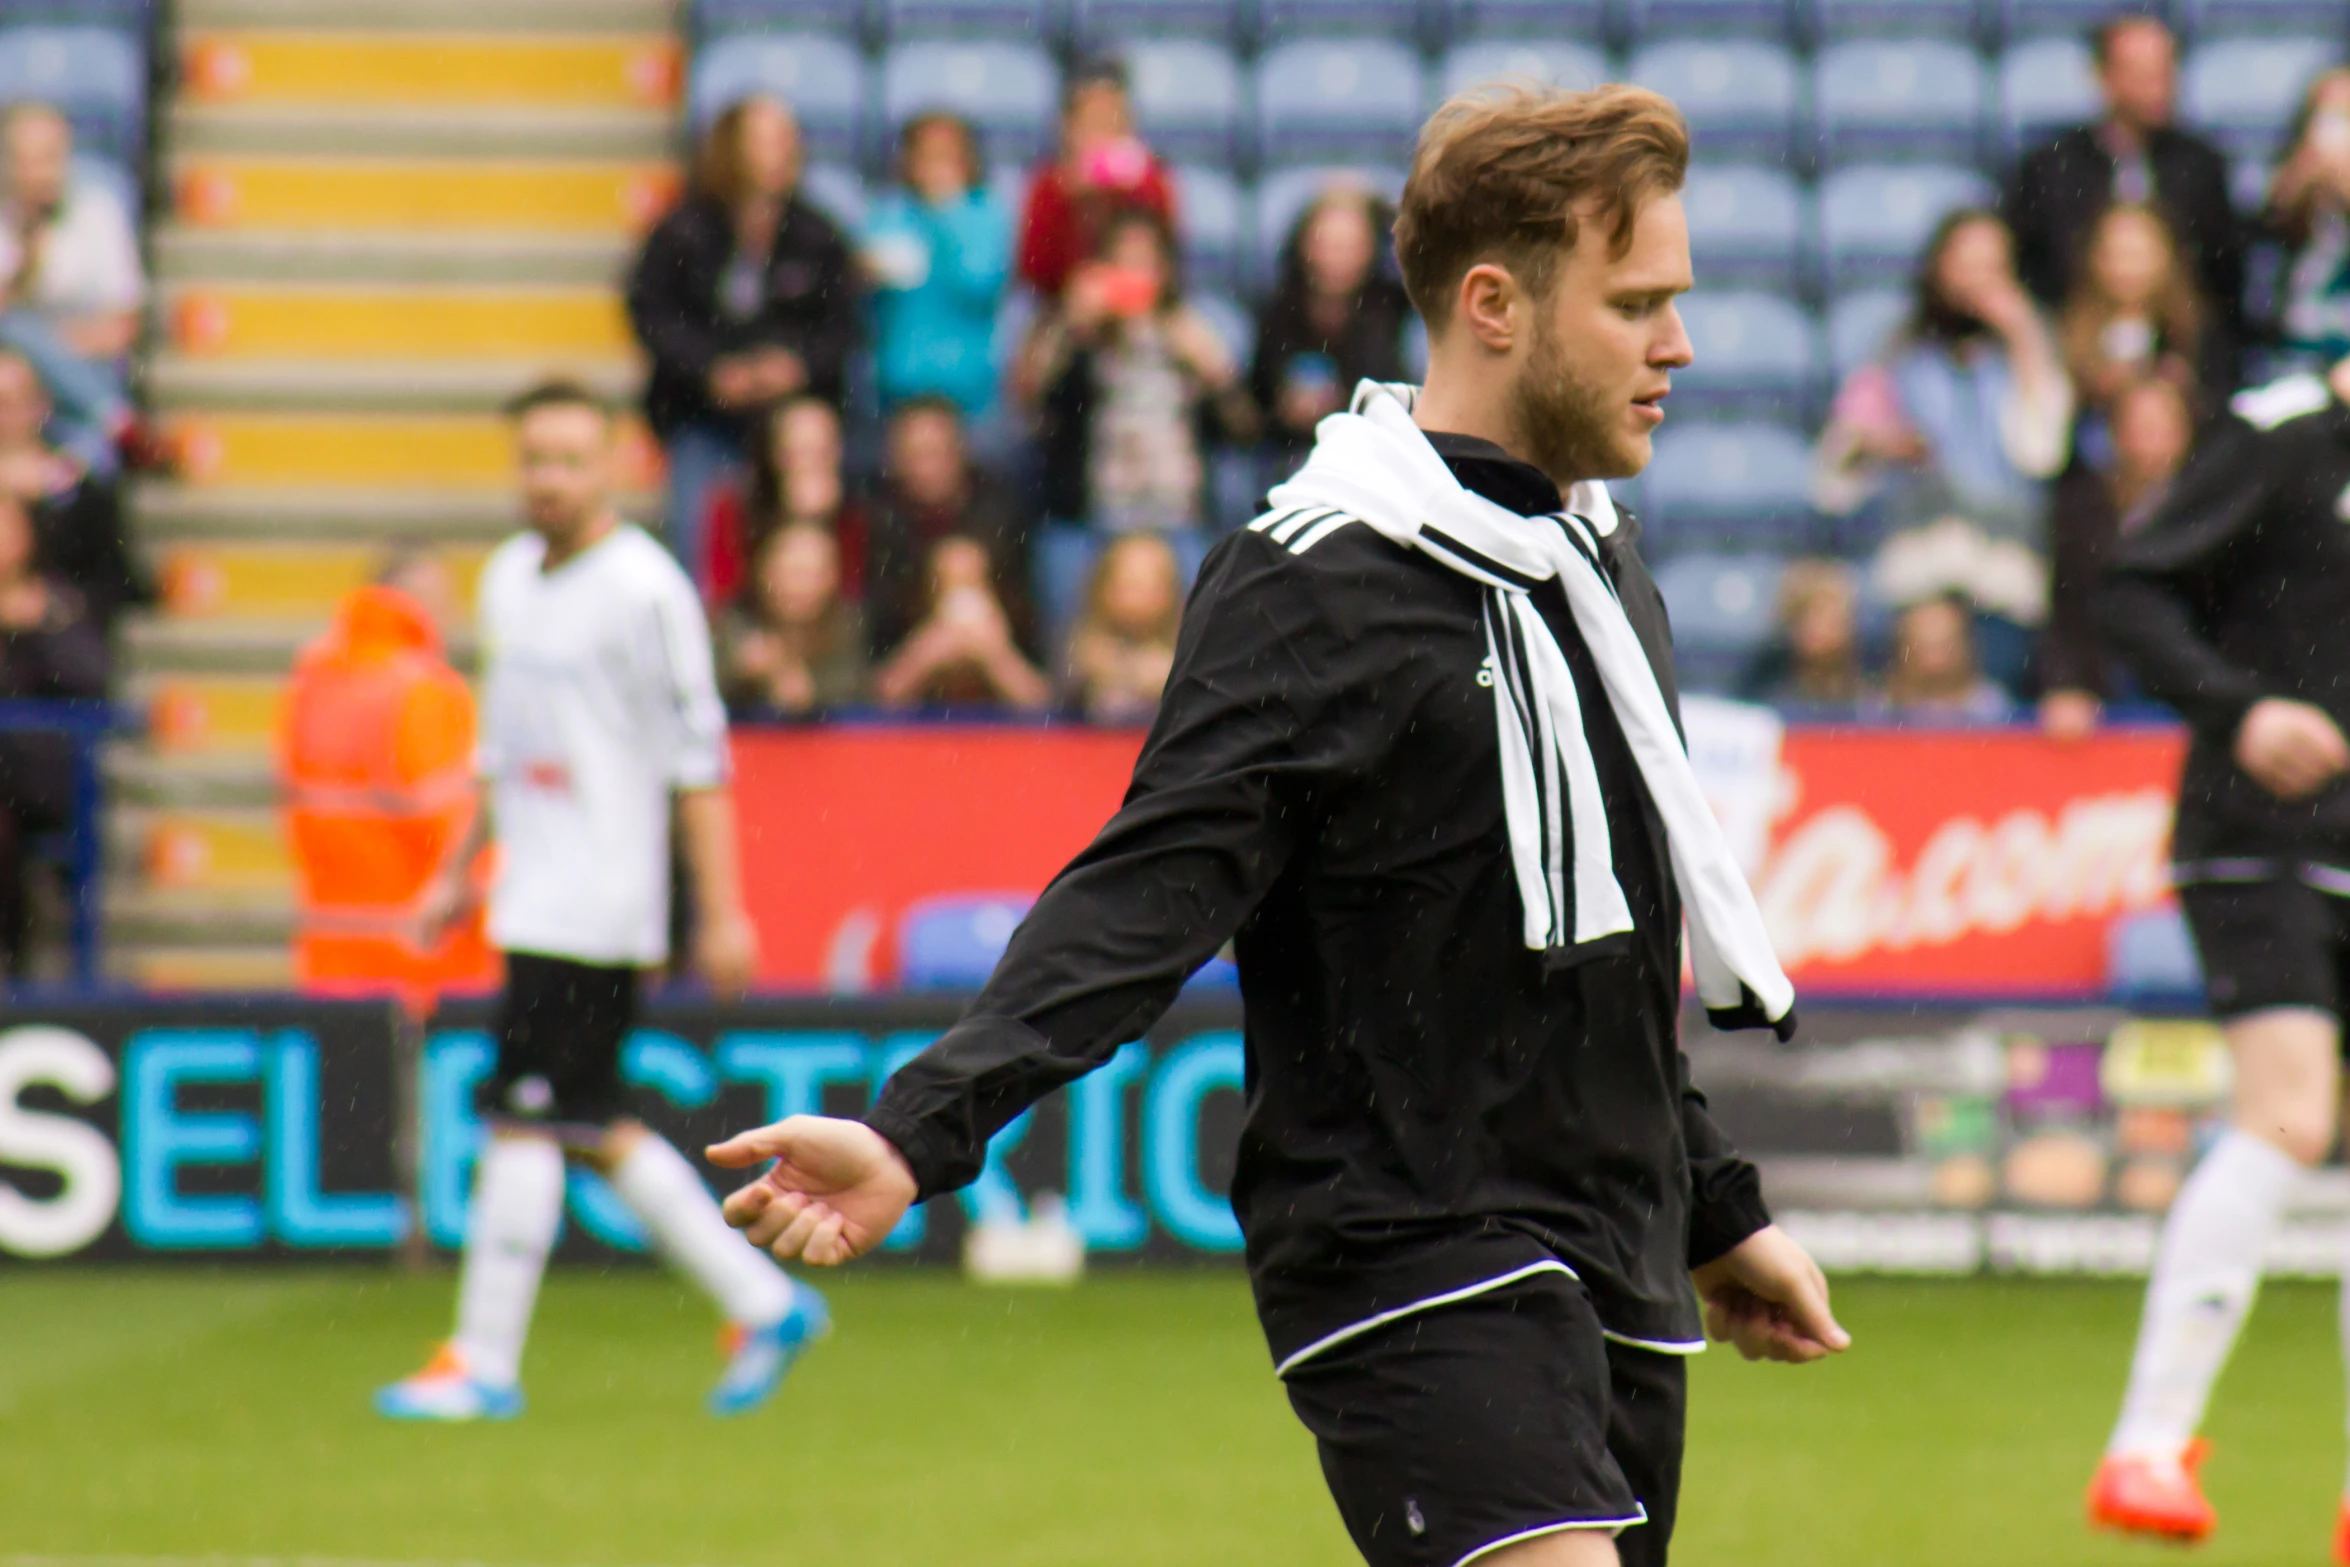 a soccer player in a stadium wearing black and white